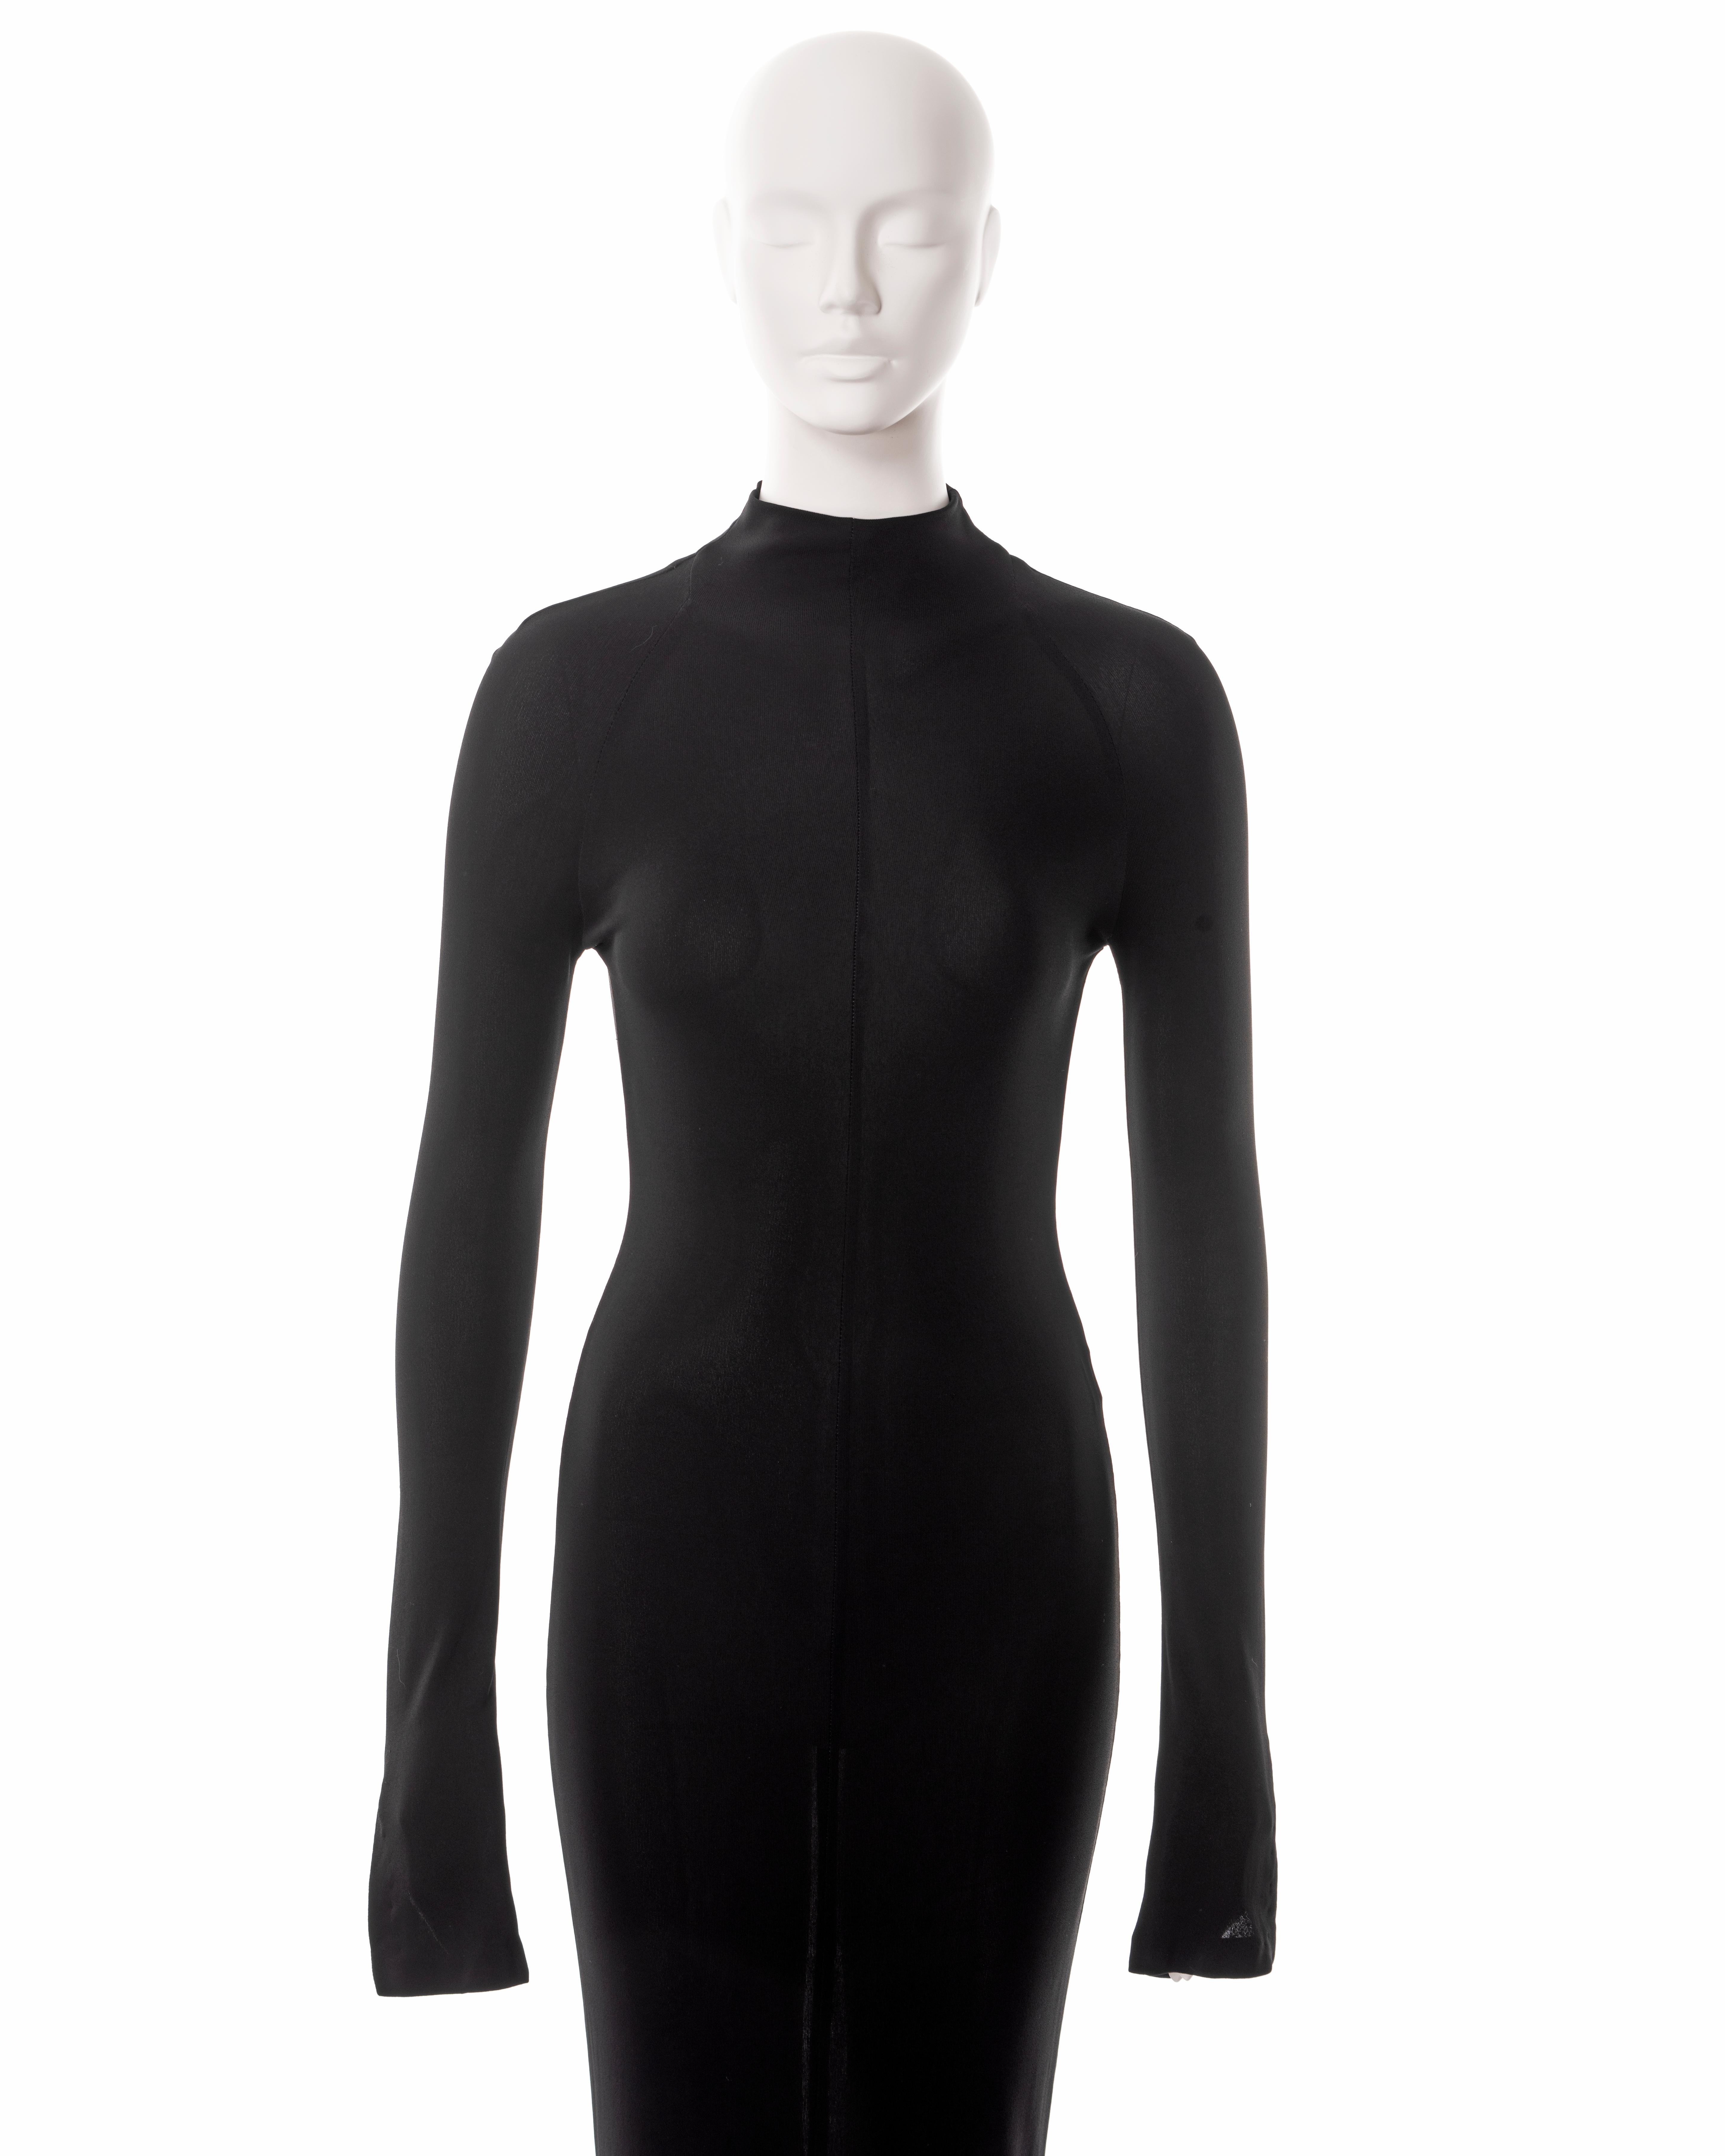 Gucci by Tom Ford black rayon jersey long sleeve bodycon maxi dress, ss 1998 1